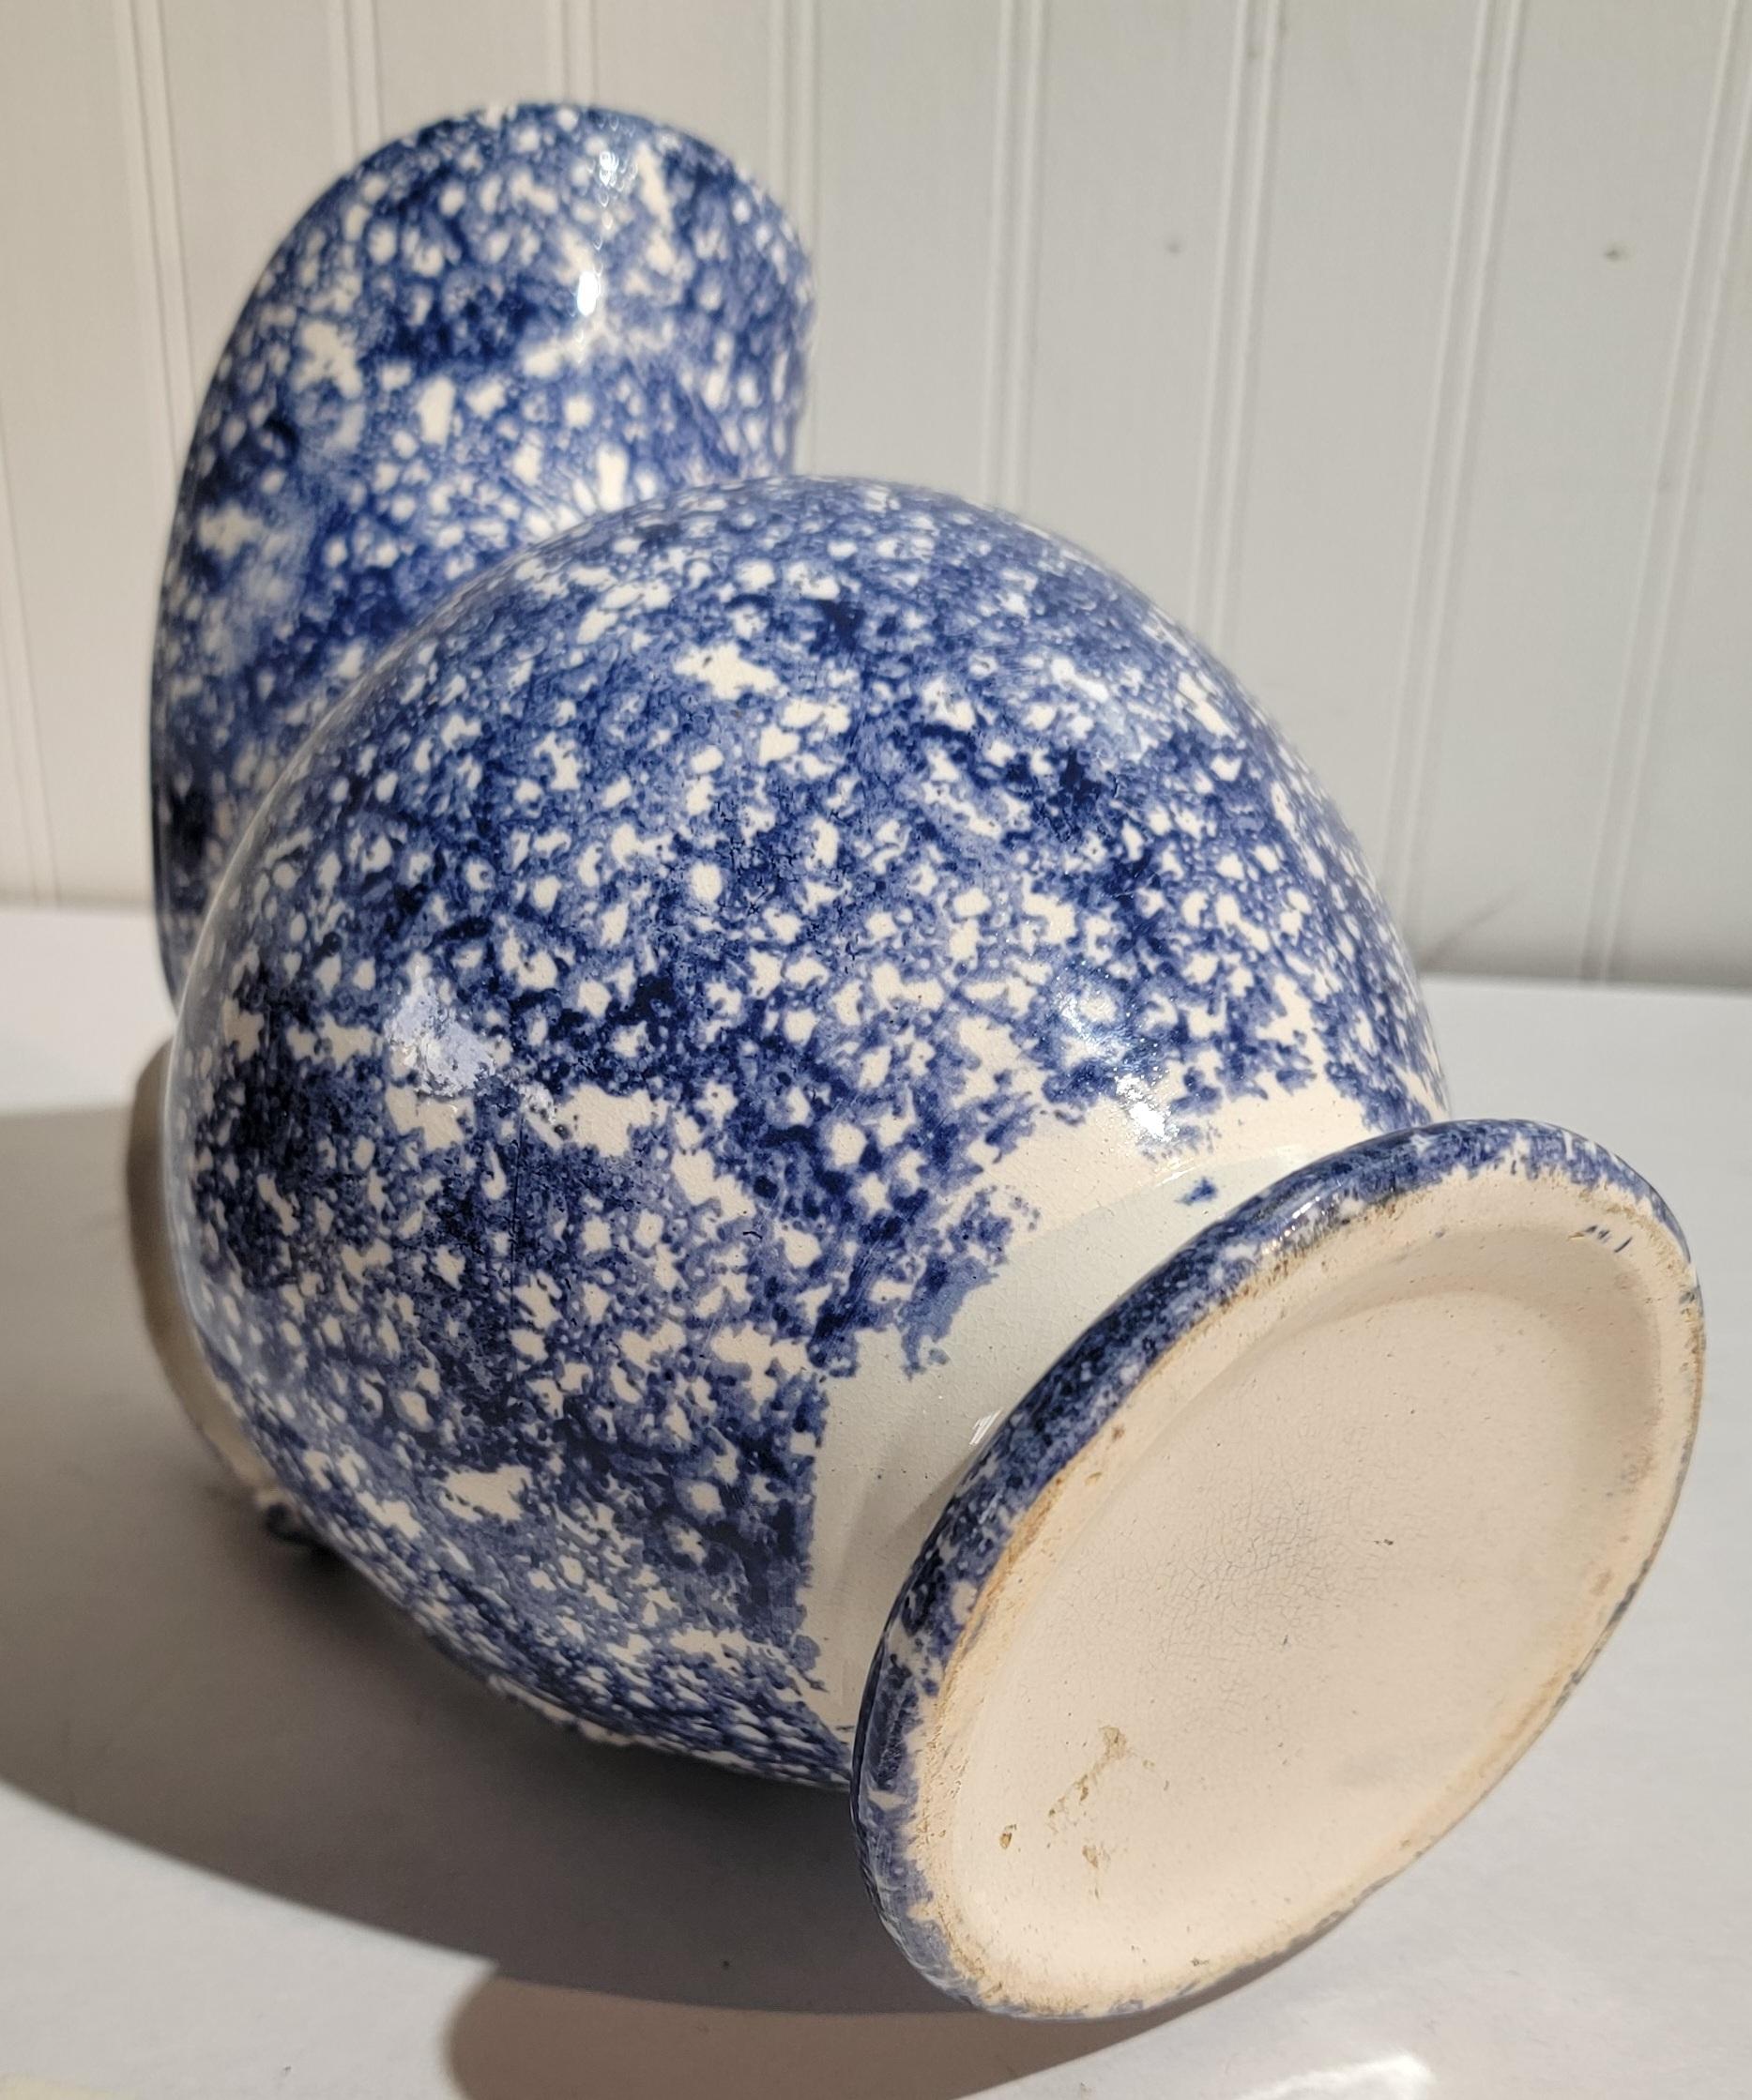 19Thc Sponge ware soft paste water pitcher in fine condition.This pattern sponge is in a darker blue color.